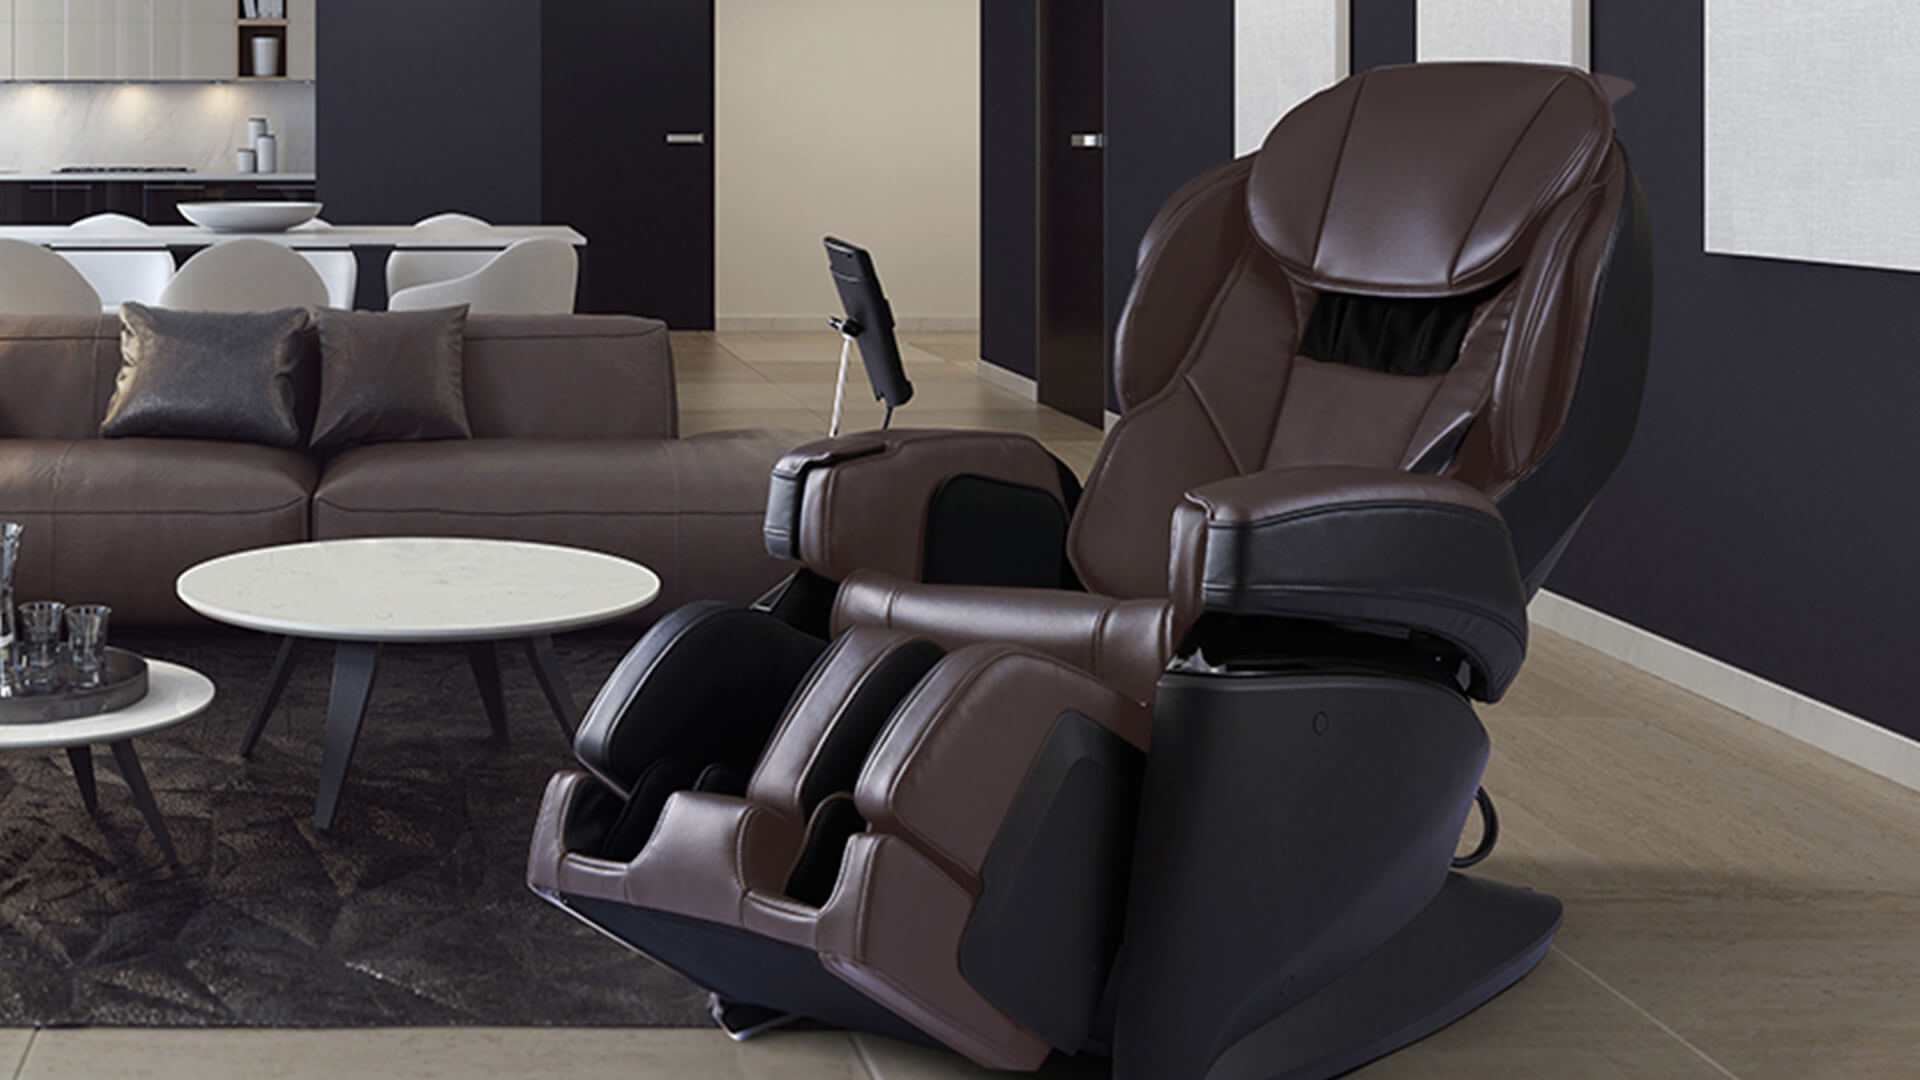 JP1100 massage chair in living room